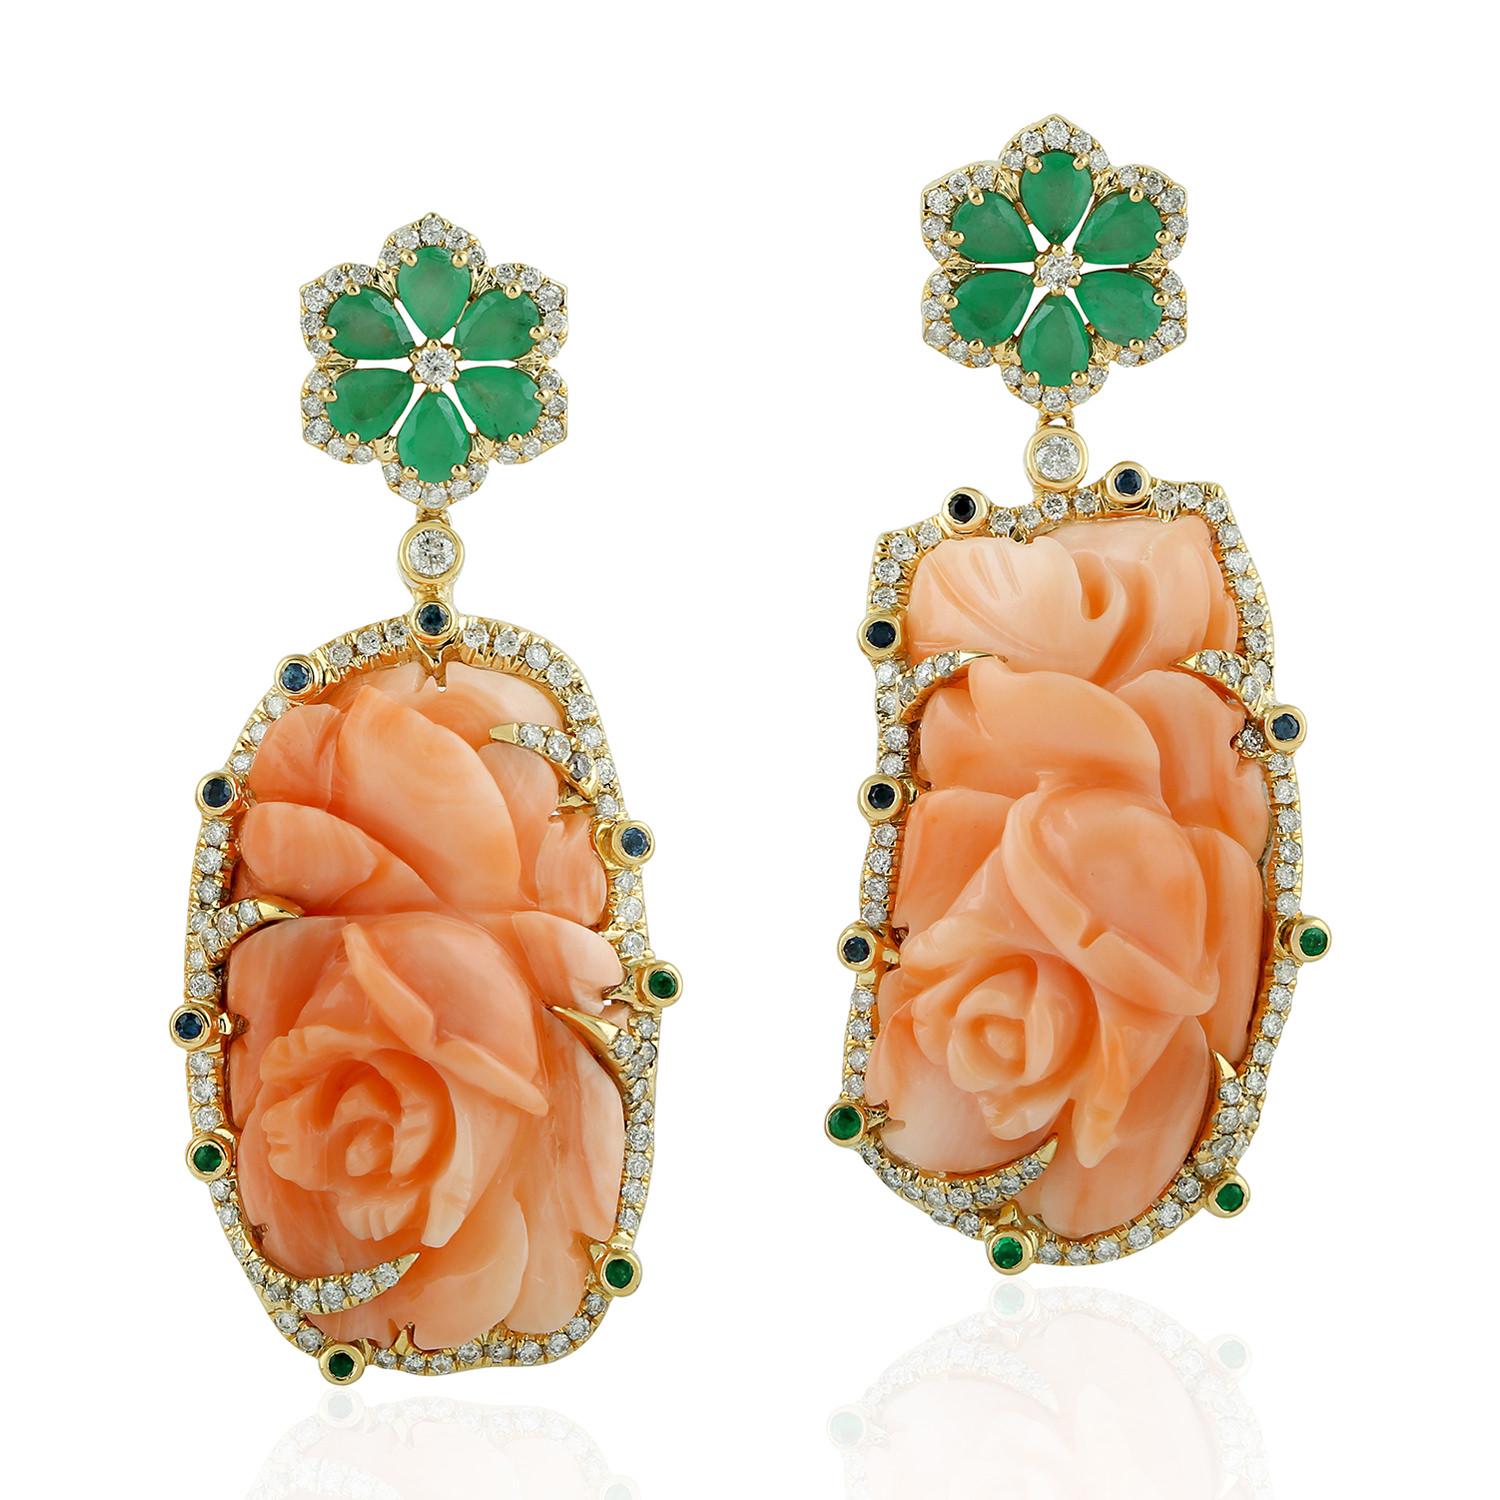 Mixed Cut 41.31 Carat Carved Coral Emerald 18 Karat Gold Diamond Earrings For Sale